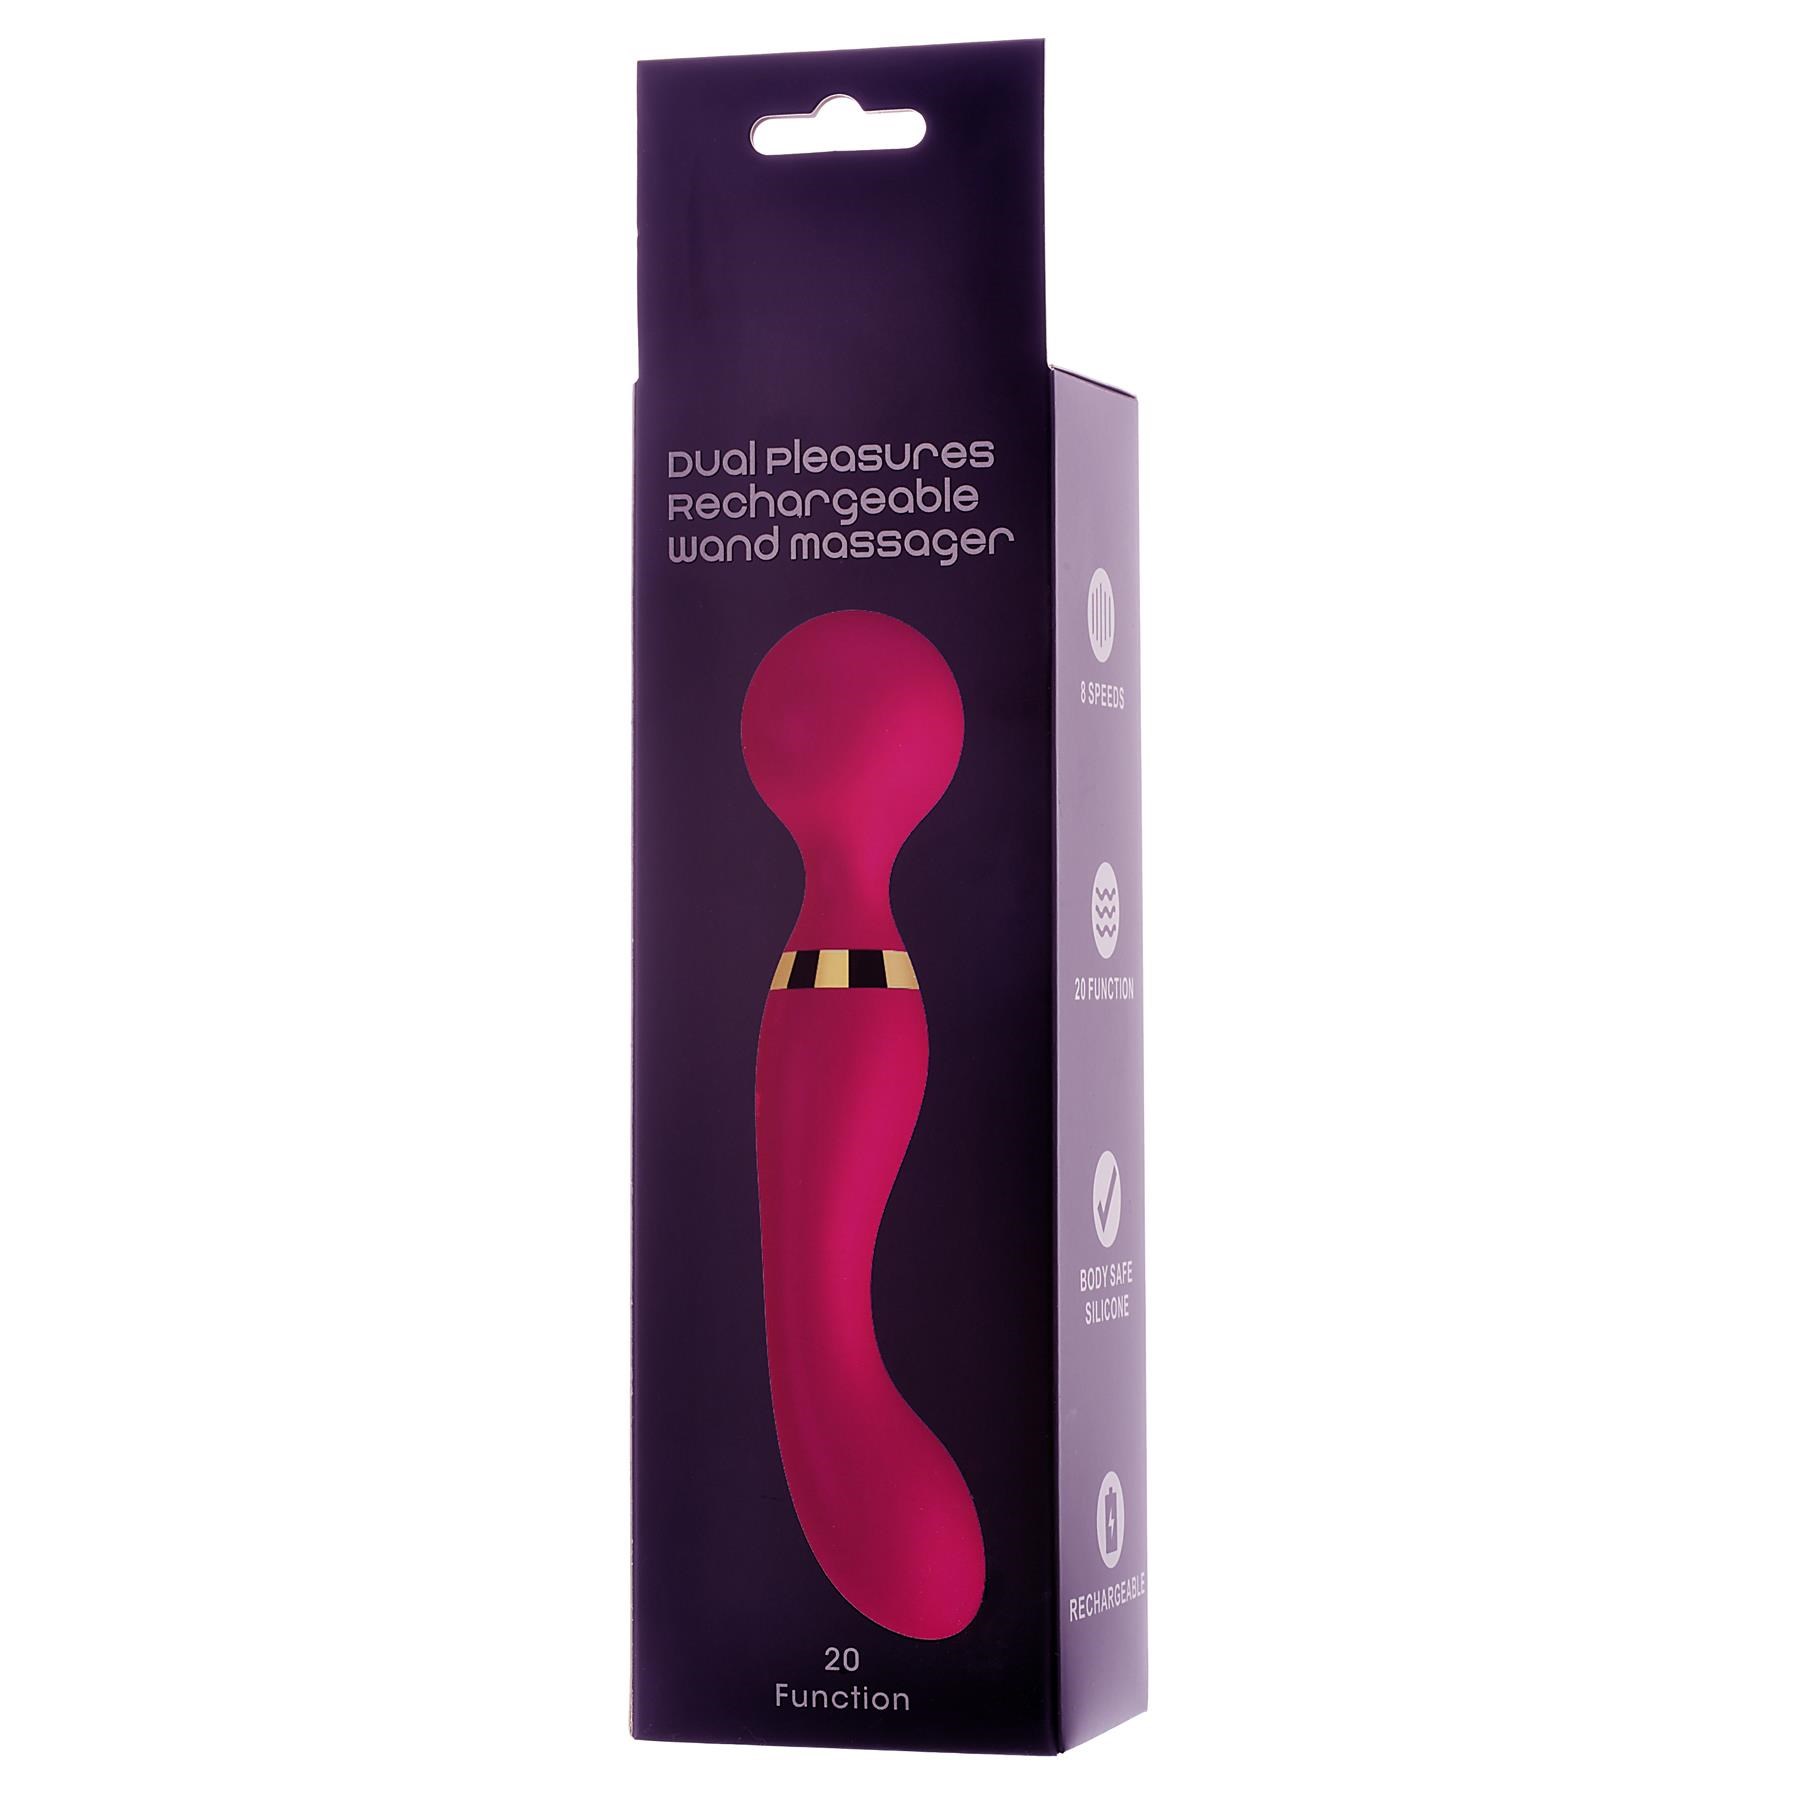 Dual Pleasures Rechargeable Wand Massager- Packaging